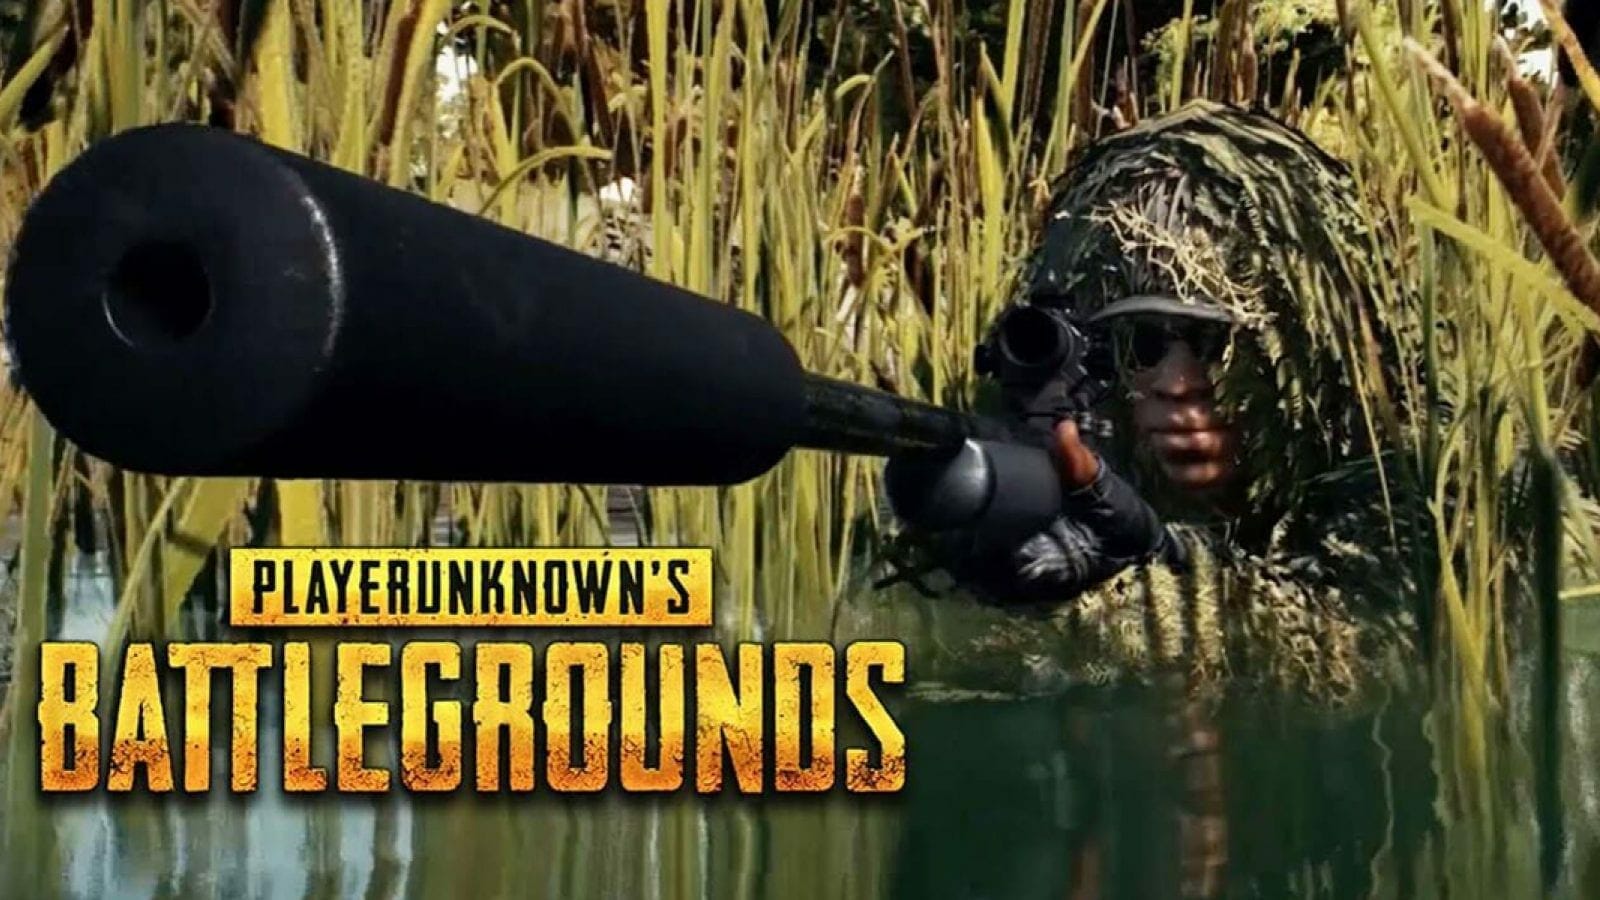 pubg-developers-comment-on-audio-changes-noticed-by-players.jpg